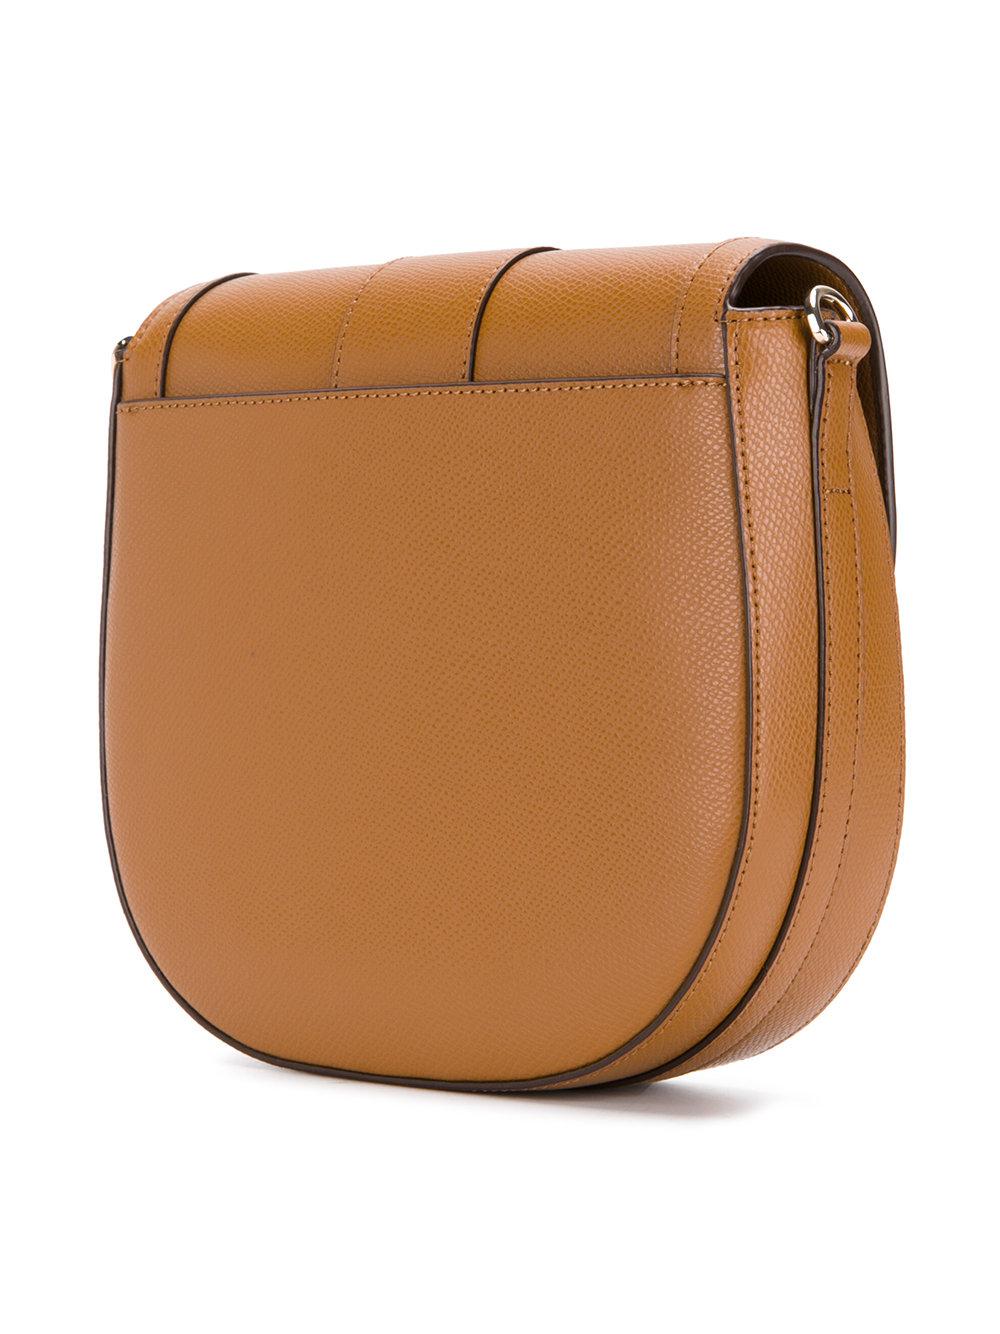 DKNY Leather Foldover Crossbody Bag in Brown - Lyst